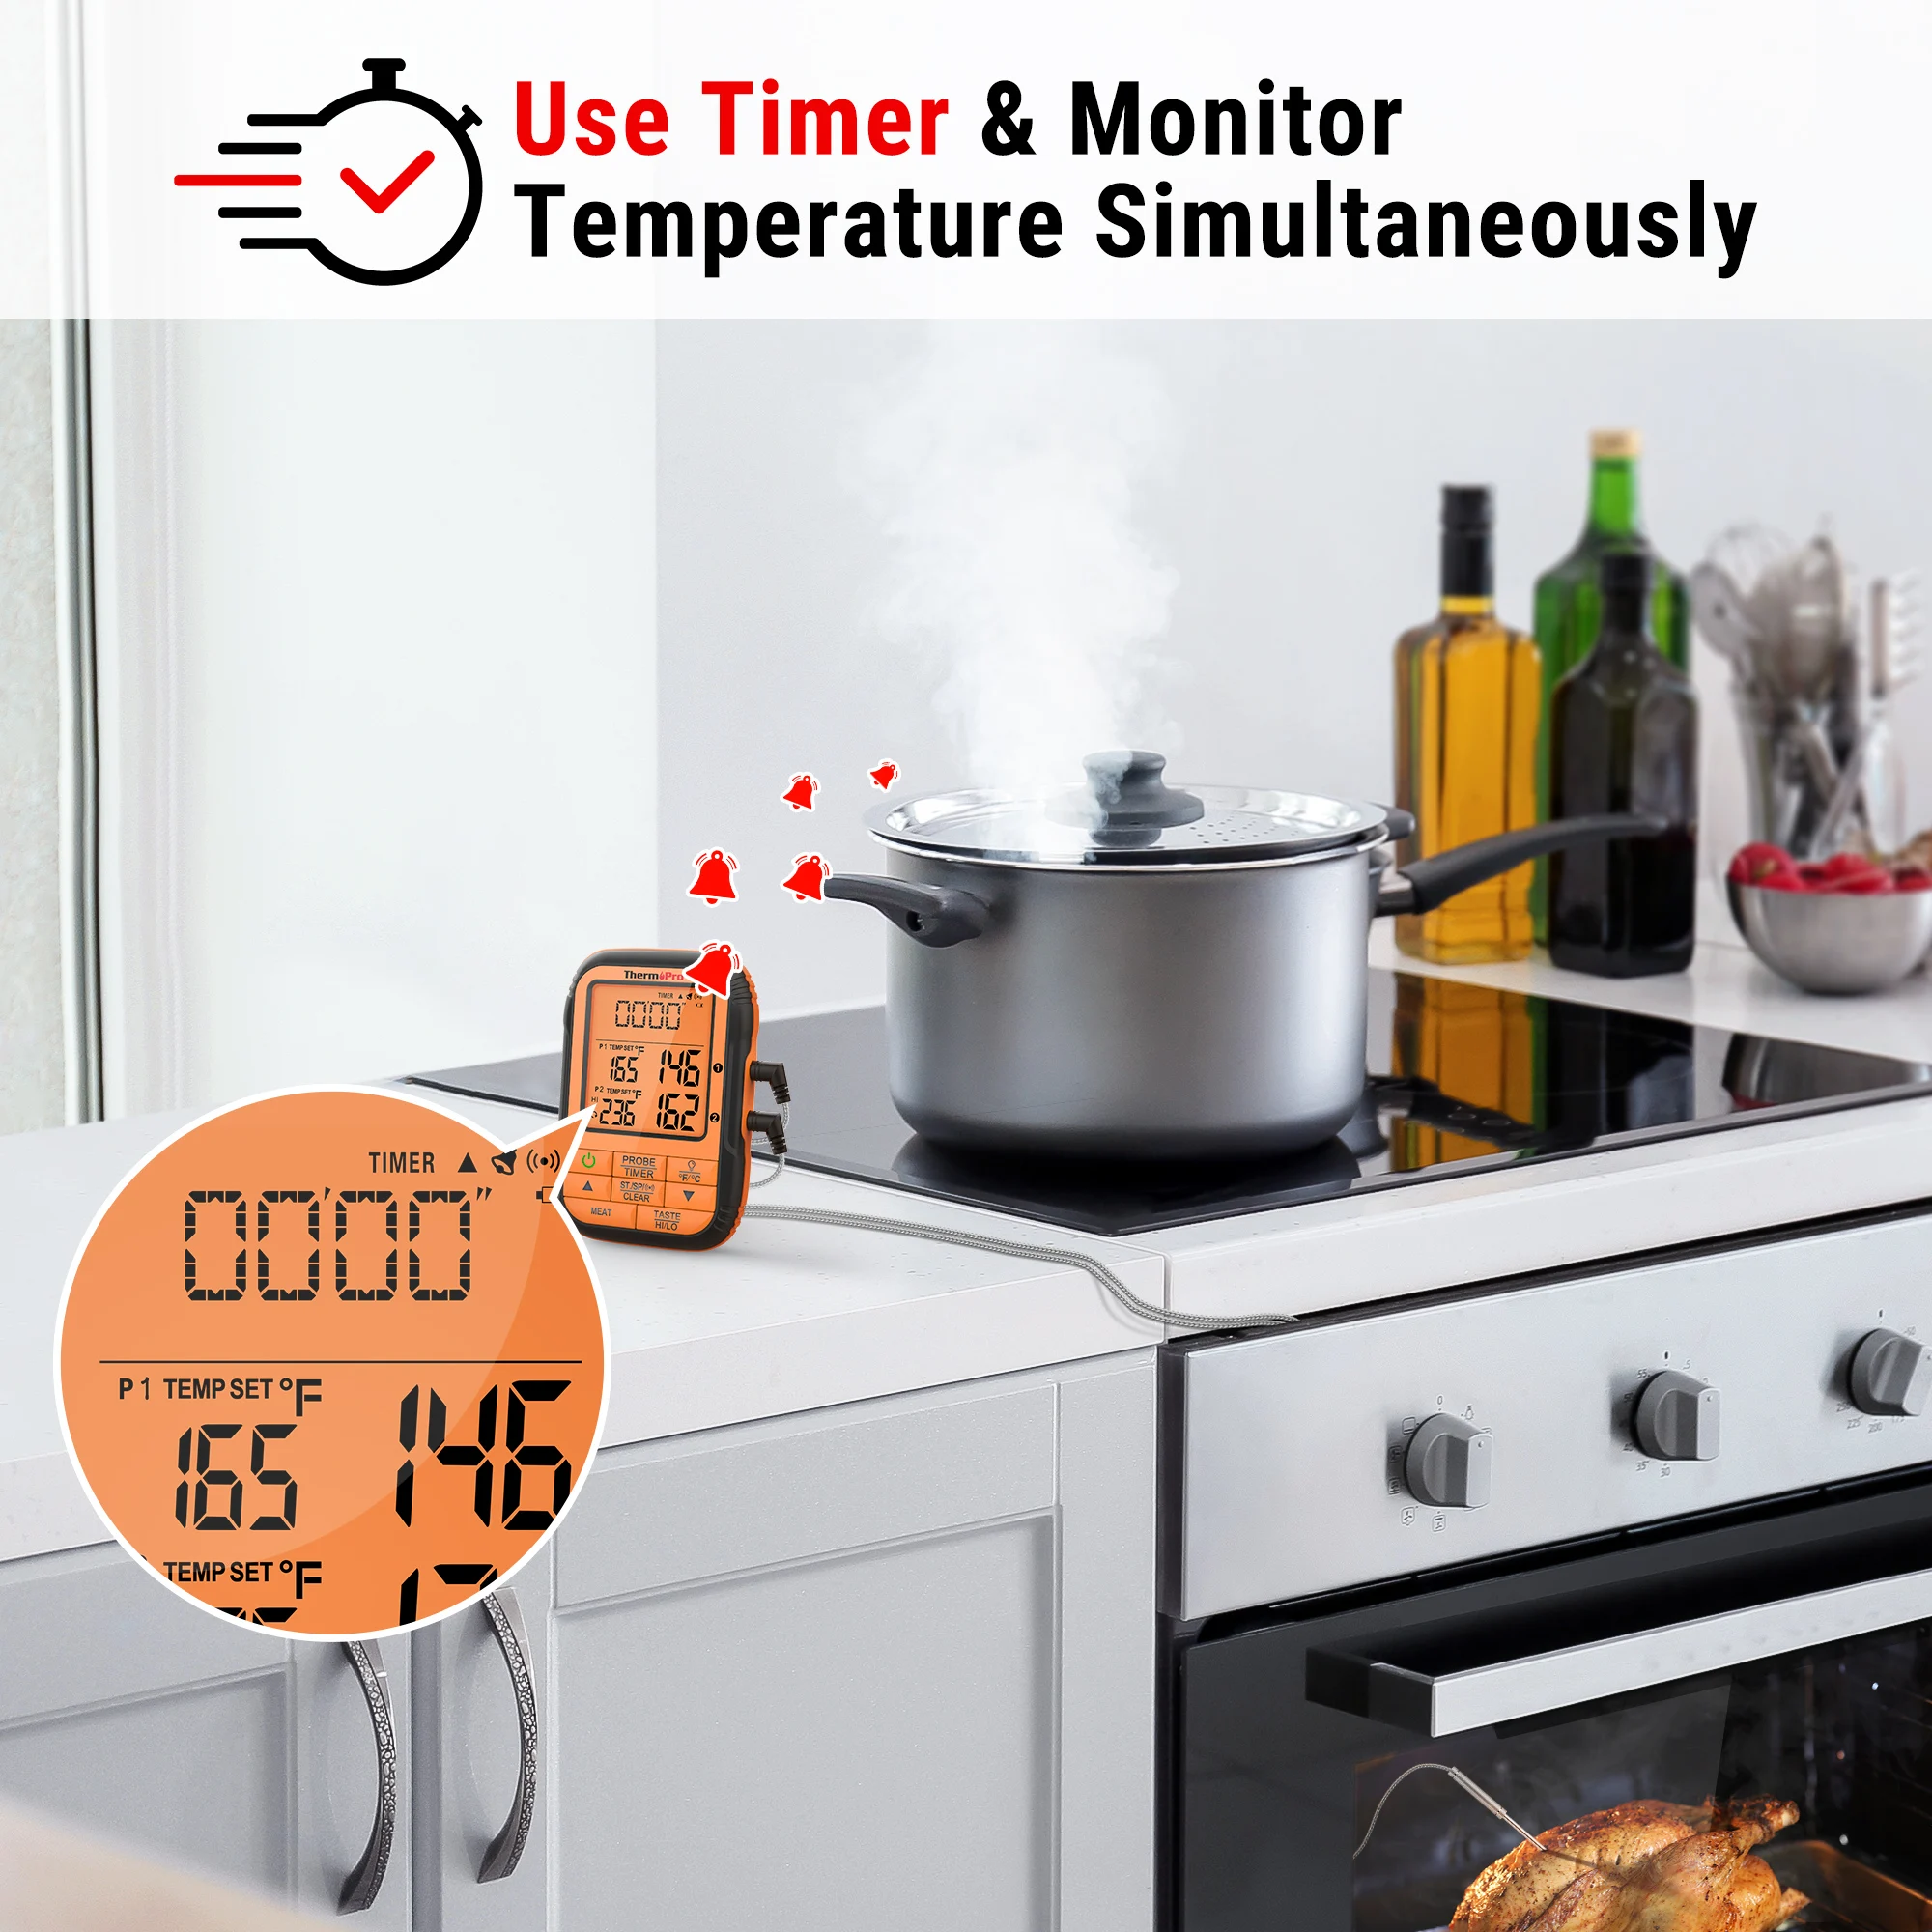 https://ae01.alicdn.com/kf/H69643464209d41ebb4365bcc5d4948b5T/ThermoPro-TP28C-150M-Wireless-2-Meat-Probes-Digital-Kitchen-Thermometer-For-Meat-Oven-Cooking-Thermometer-With.jpg